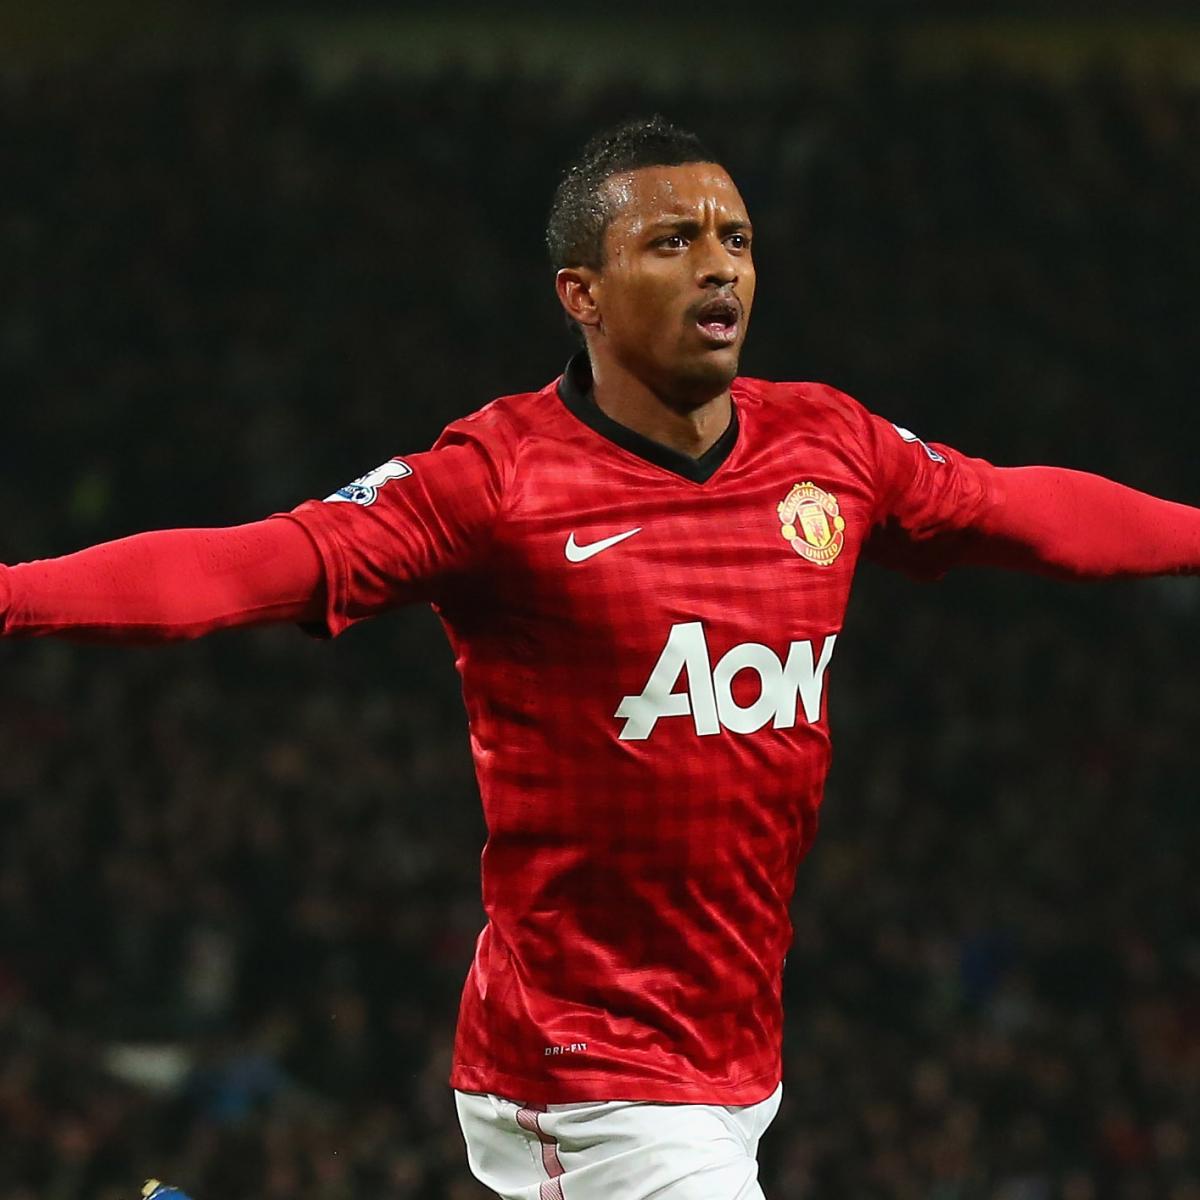 Nani Transfer Rumours: Latest News on the Man United Star (Week of